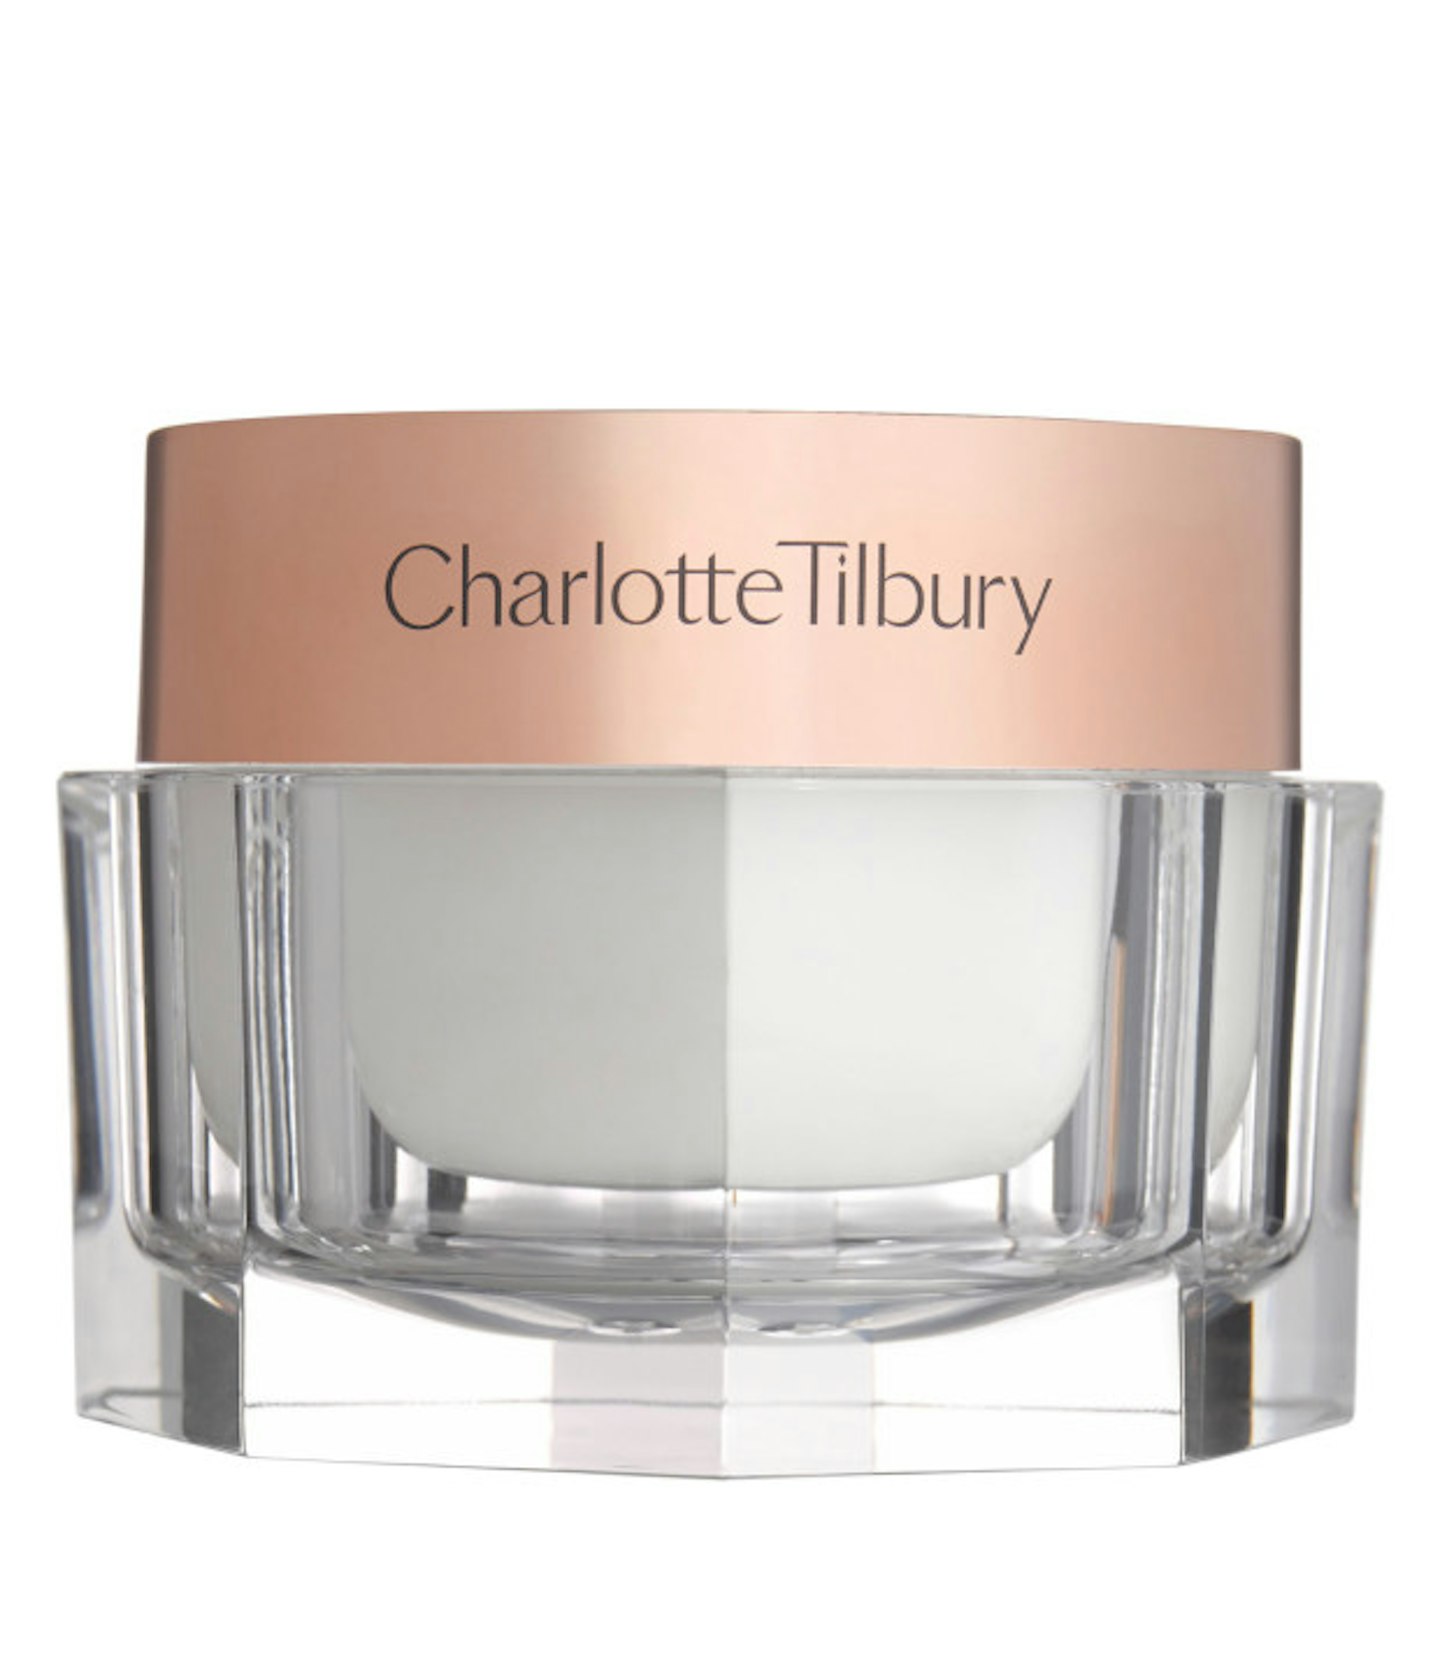 Charlotte started off by complementing Amal's naturally gorgeous skin with this wonder cream